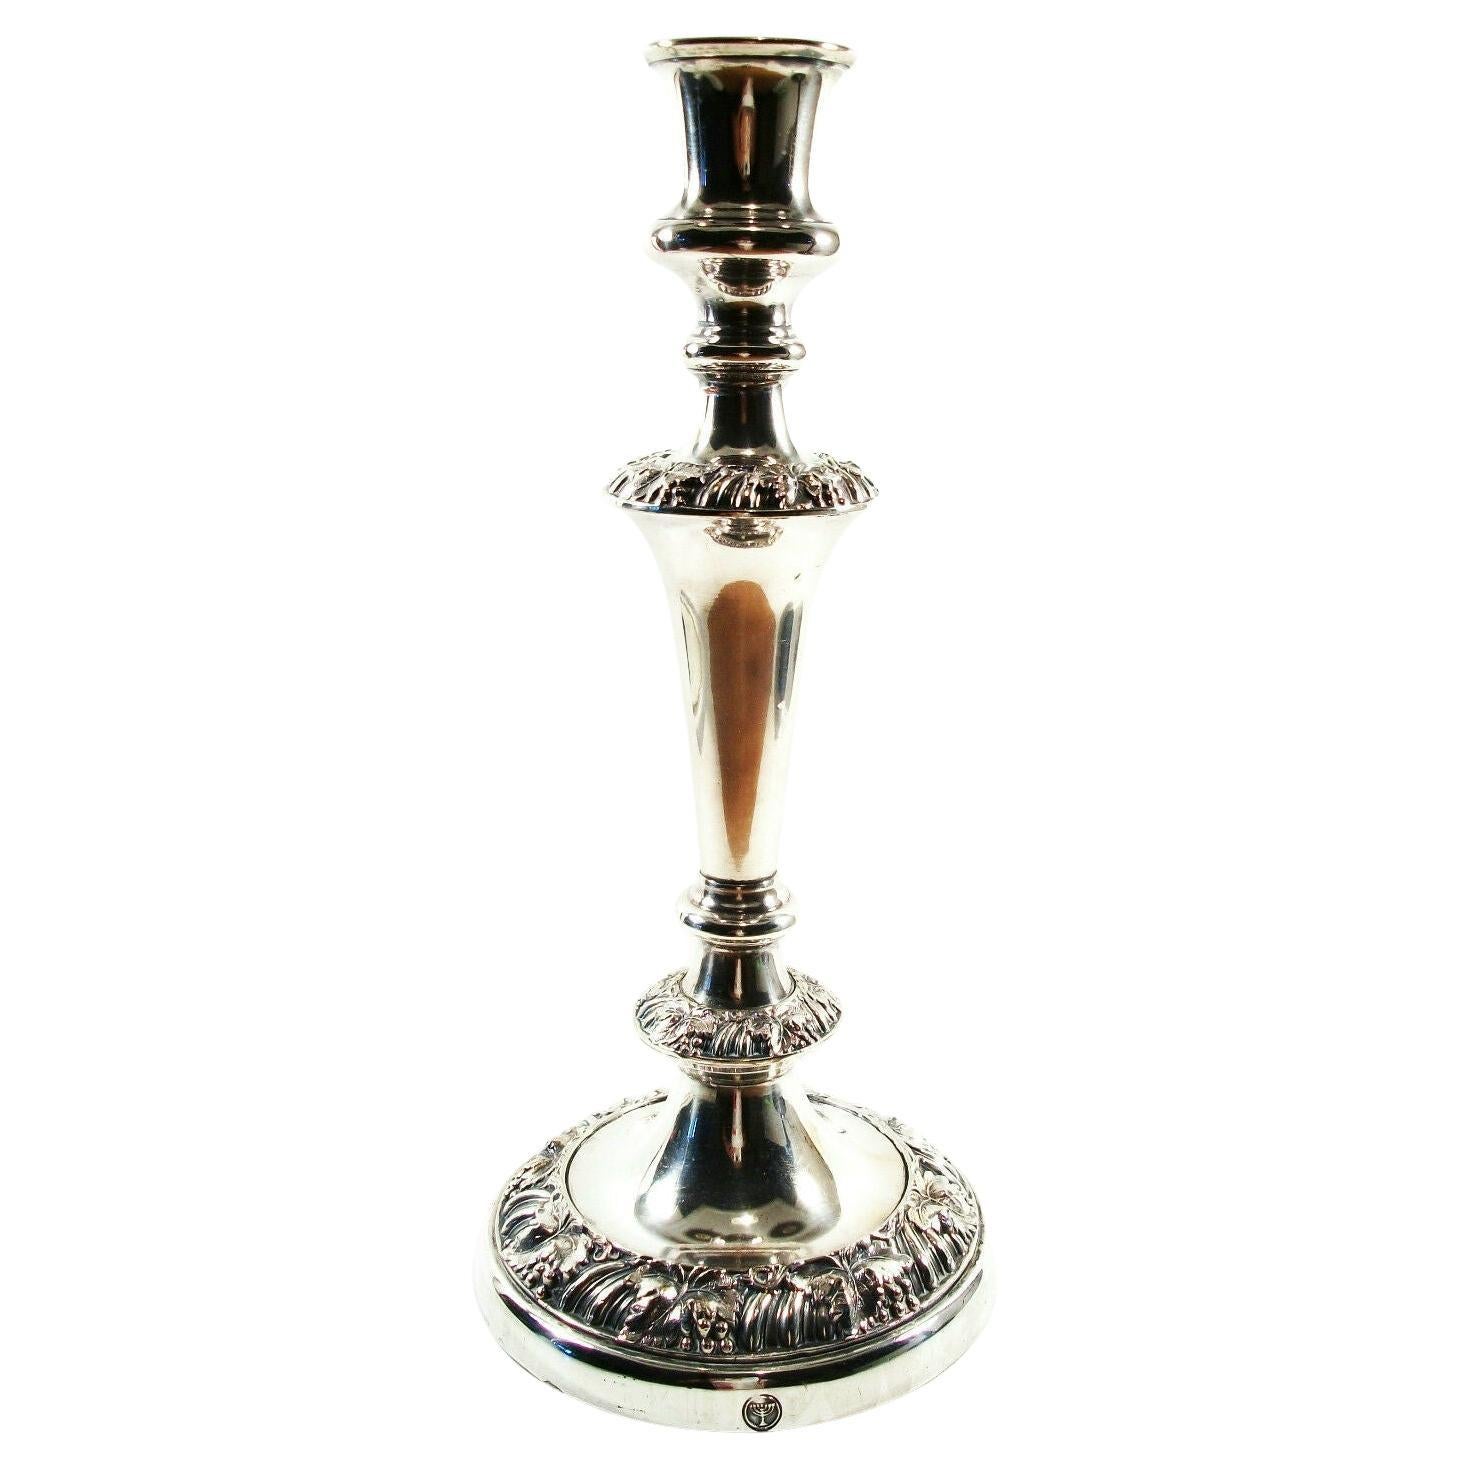 Ellis Barker, Antique Silver Plate Candlestick, England, Early 20th Century